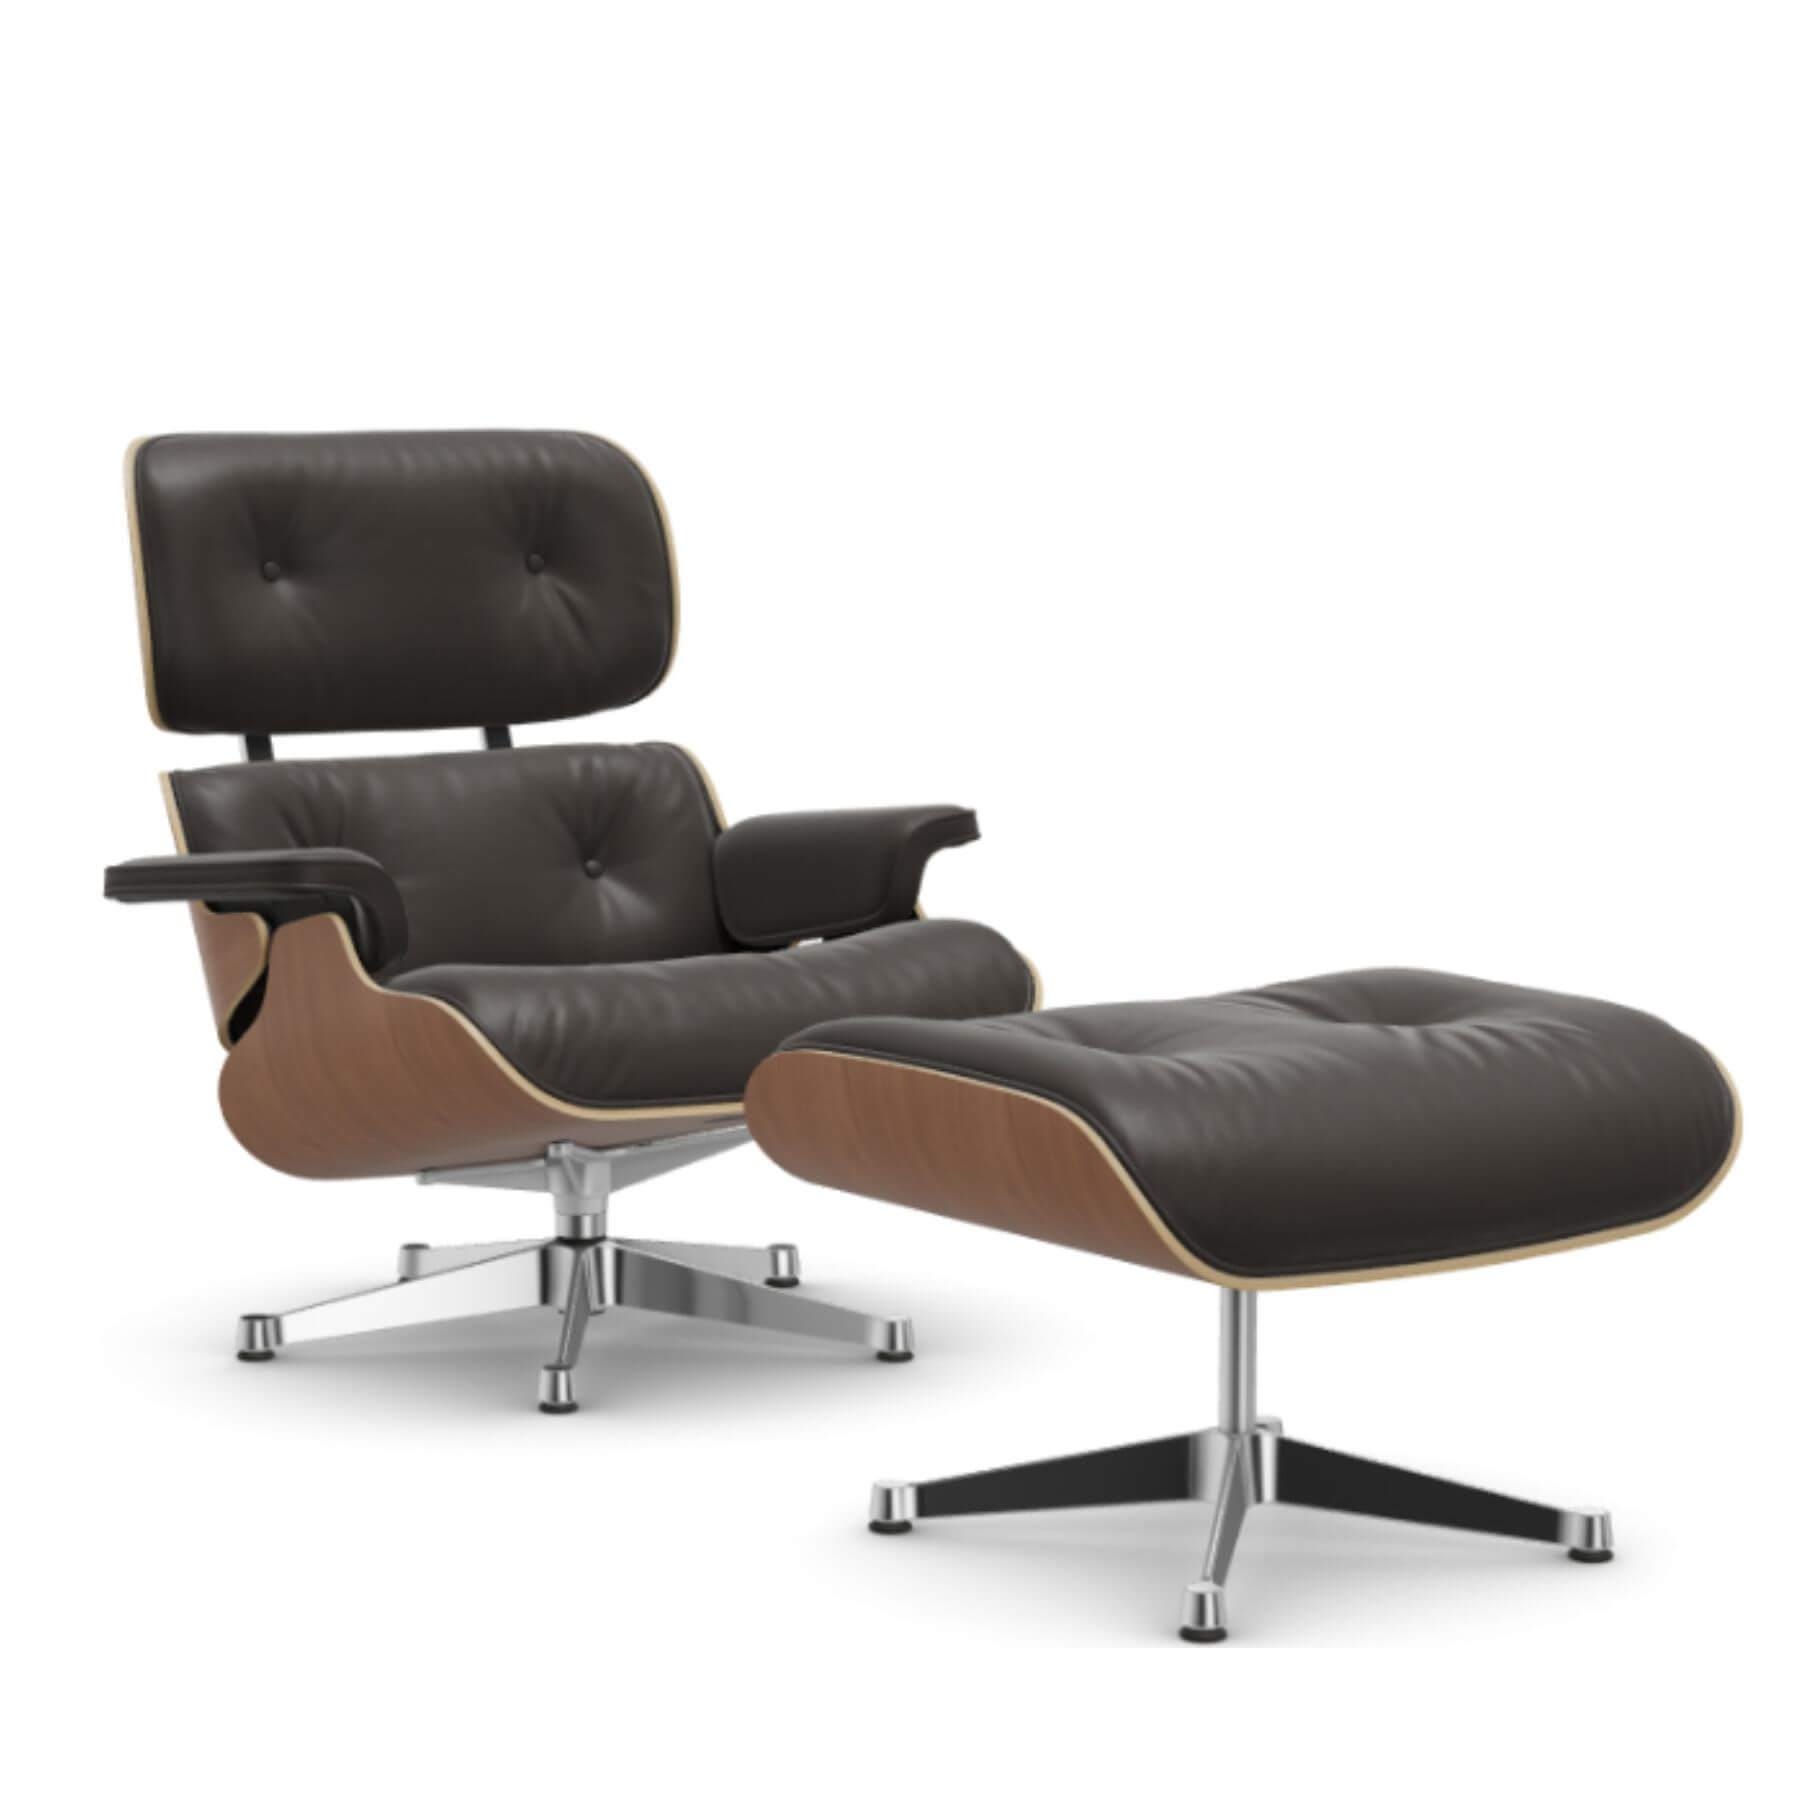 Vitra Eames Lounge Chair American Cherry Leather Natural F Chocolate Polished Aluminium With Ottoman Light Wood Designer Furniture From Holloways